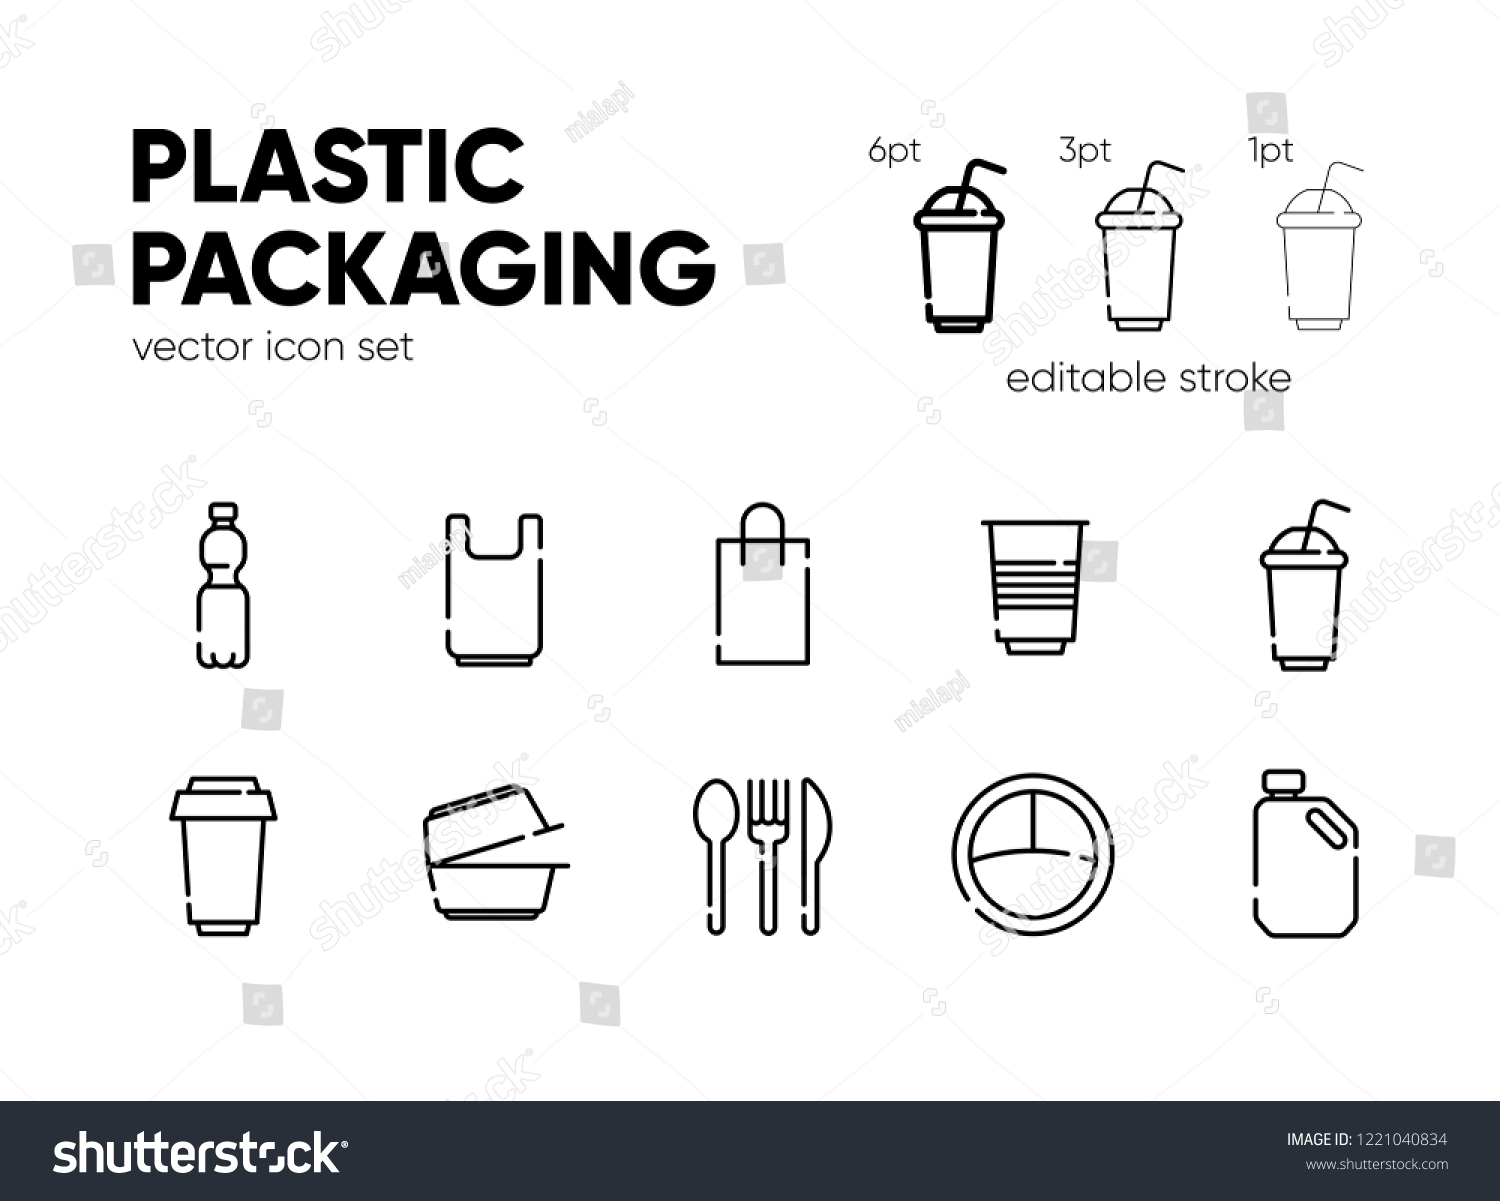 SVG of Plastic packaging icon set. Vector illustration. Bottle, bag, plate,container, cup. Outline icons with editable stroke. svg